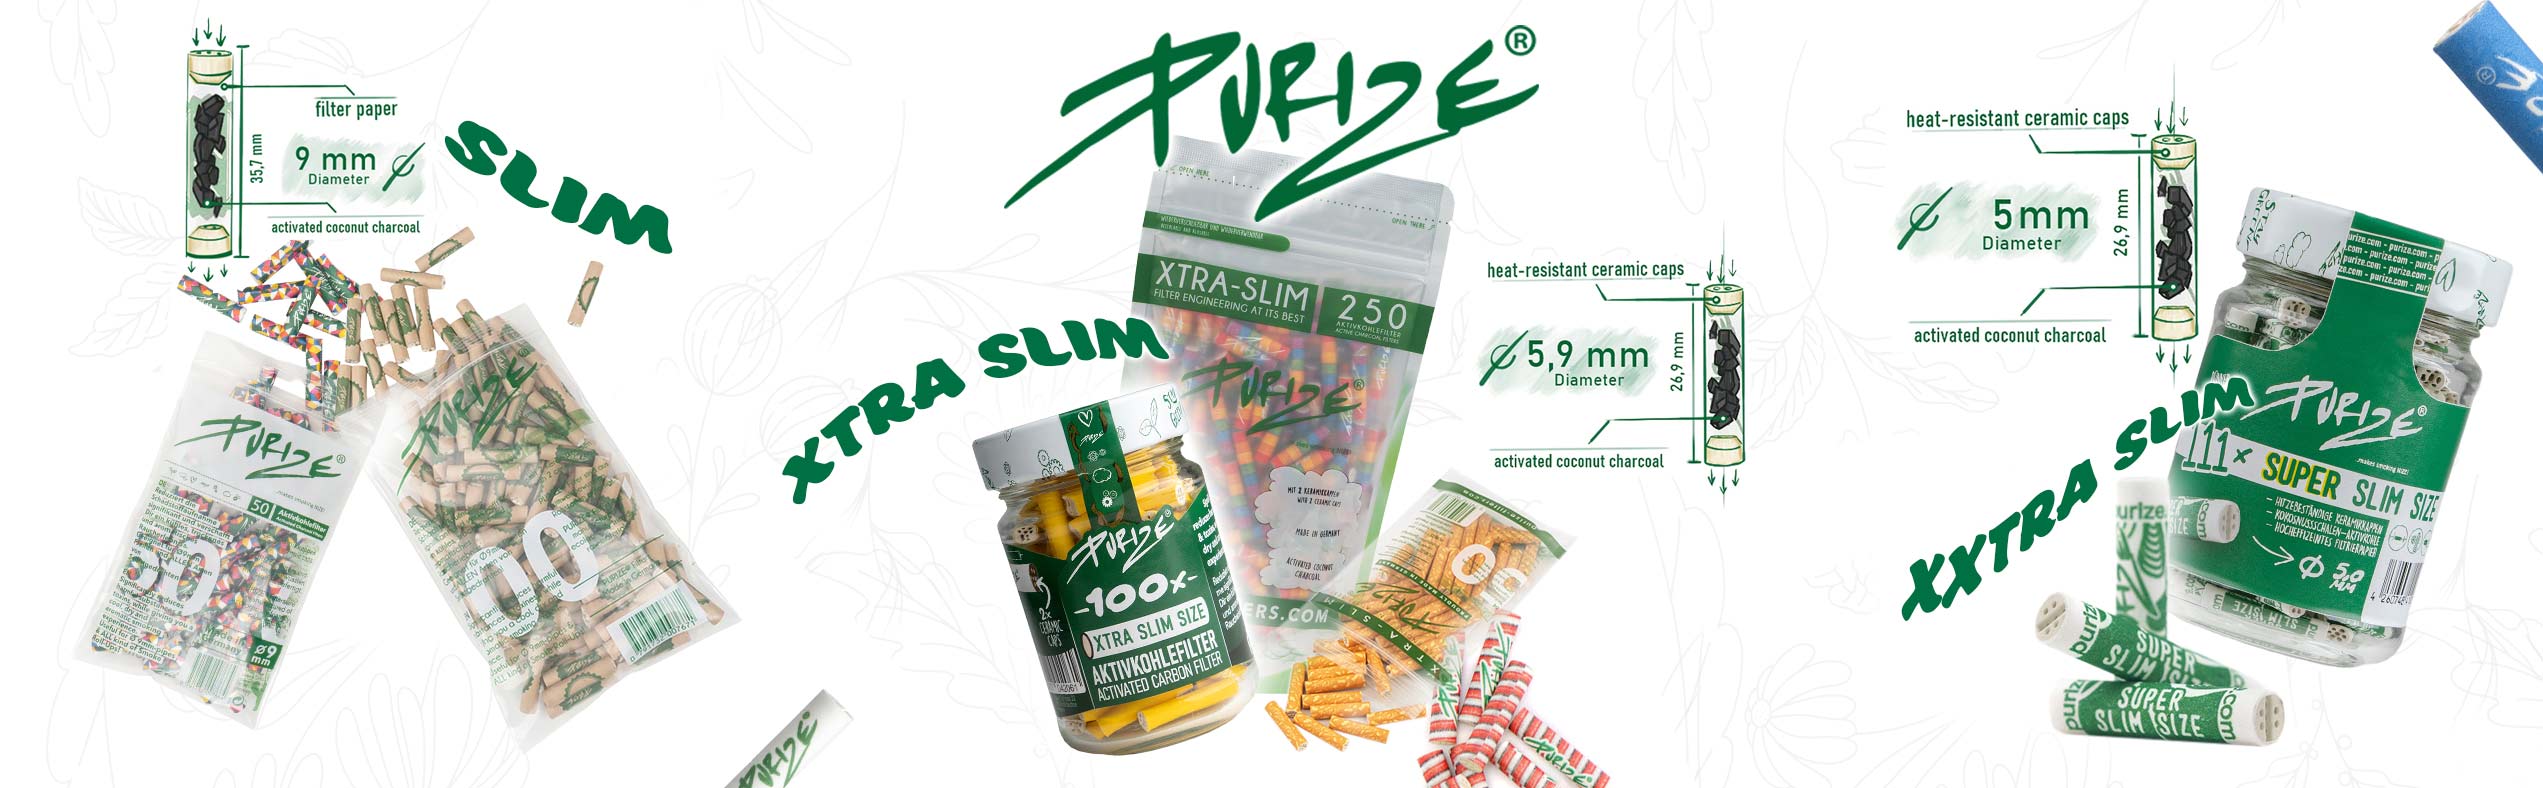 Purize Filter Tips